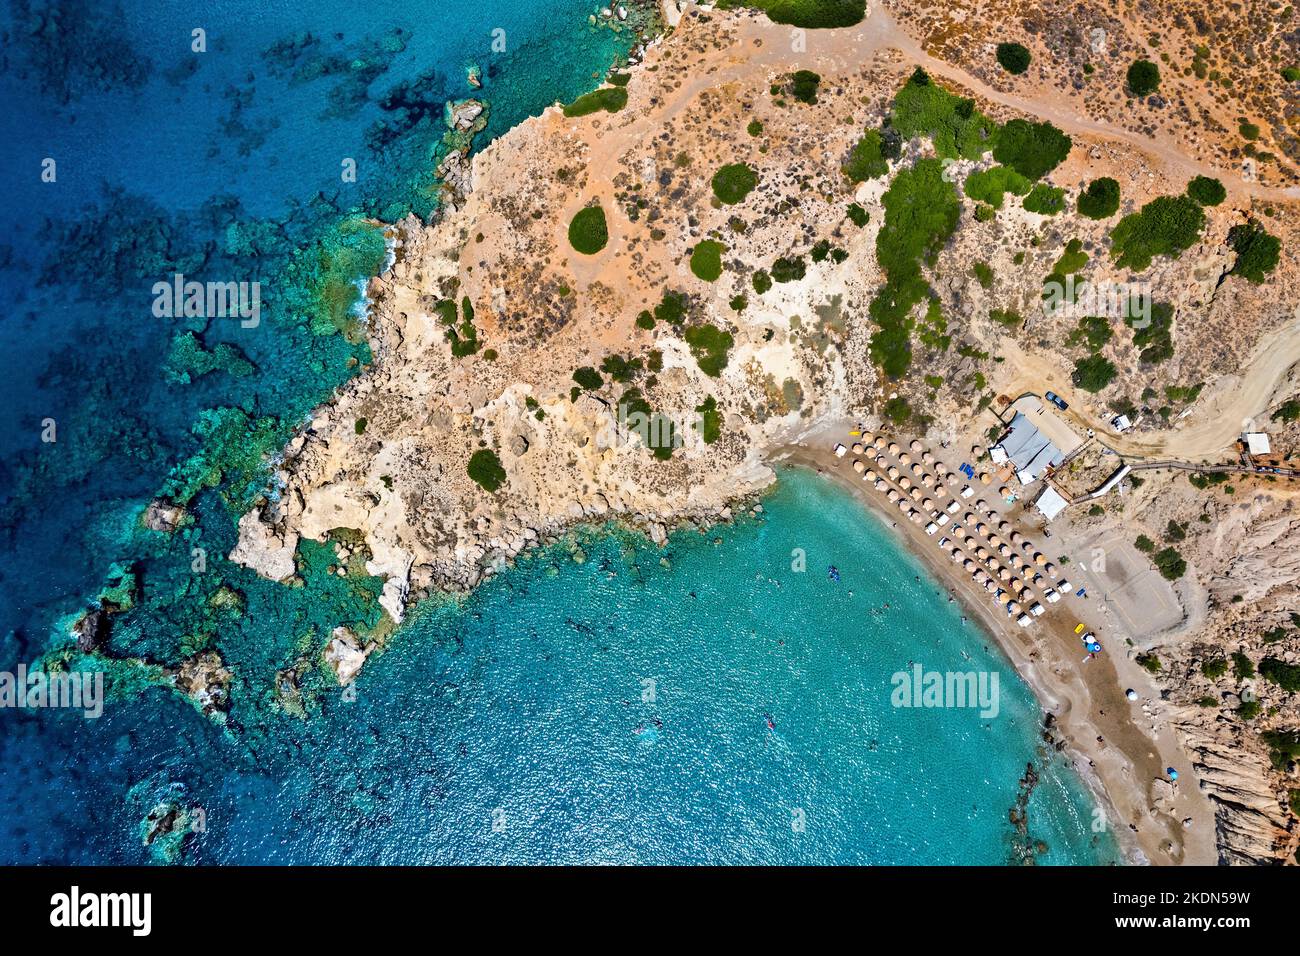 Ammoudi beach (also known as 'Dragon's Cave'), somewhere between Makrygialos and Goudouras villages, Lassithi, Southern Crete, Greece. Stock Photo